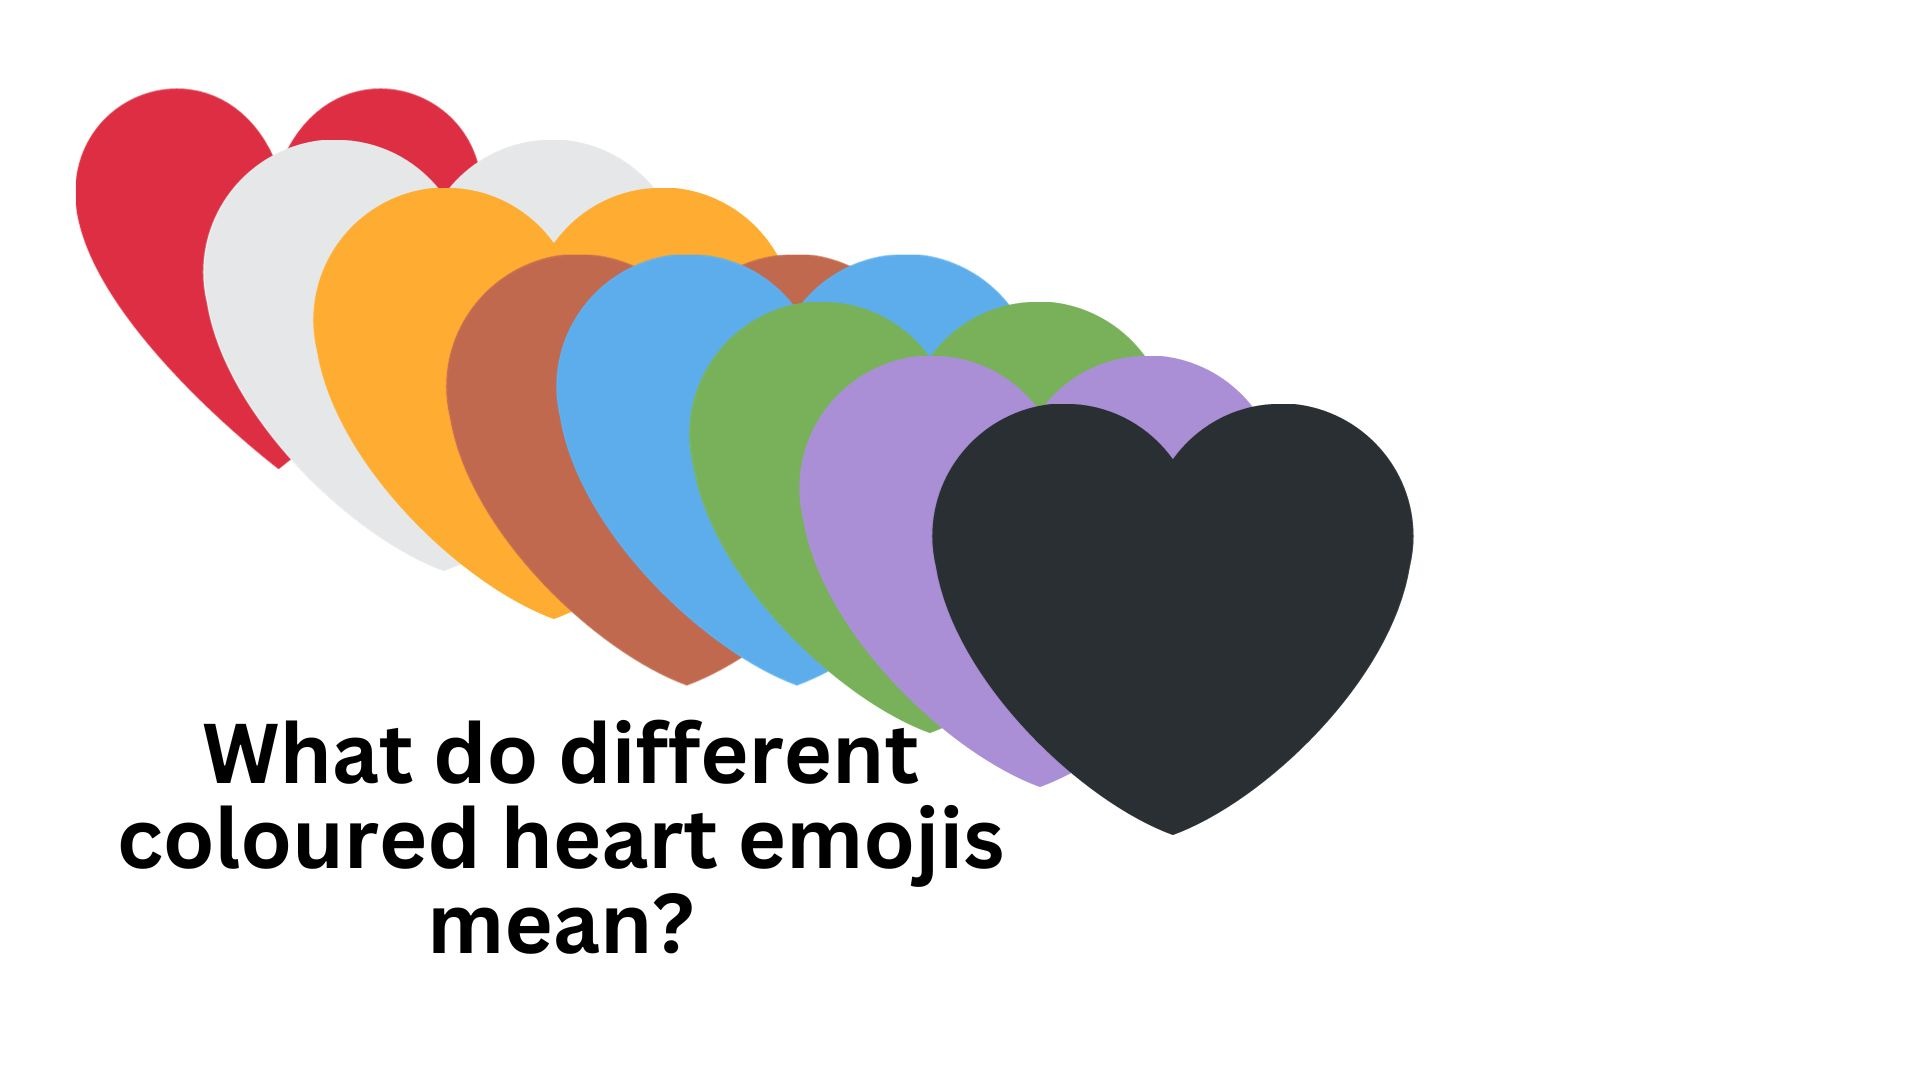 What do different coloured heart emojis mean?